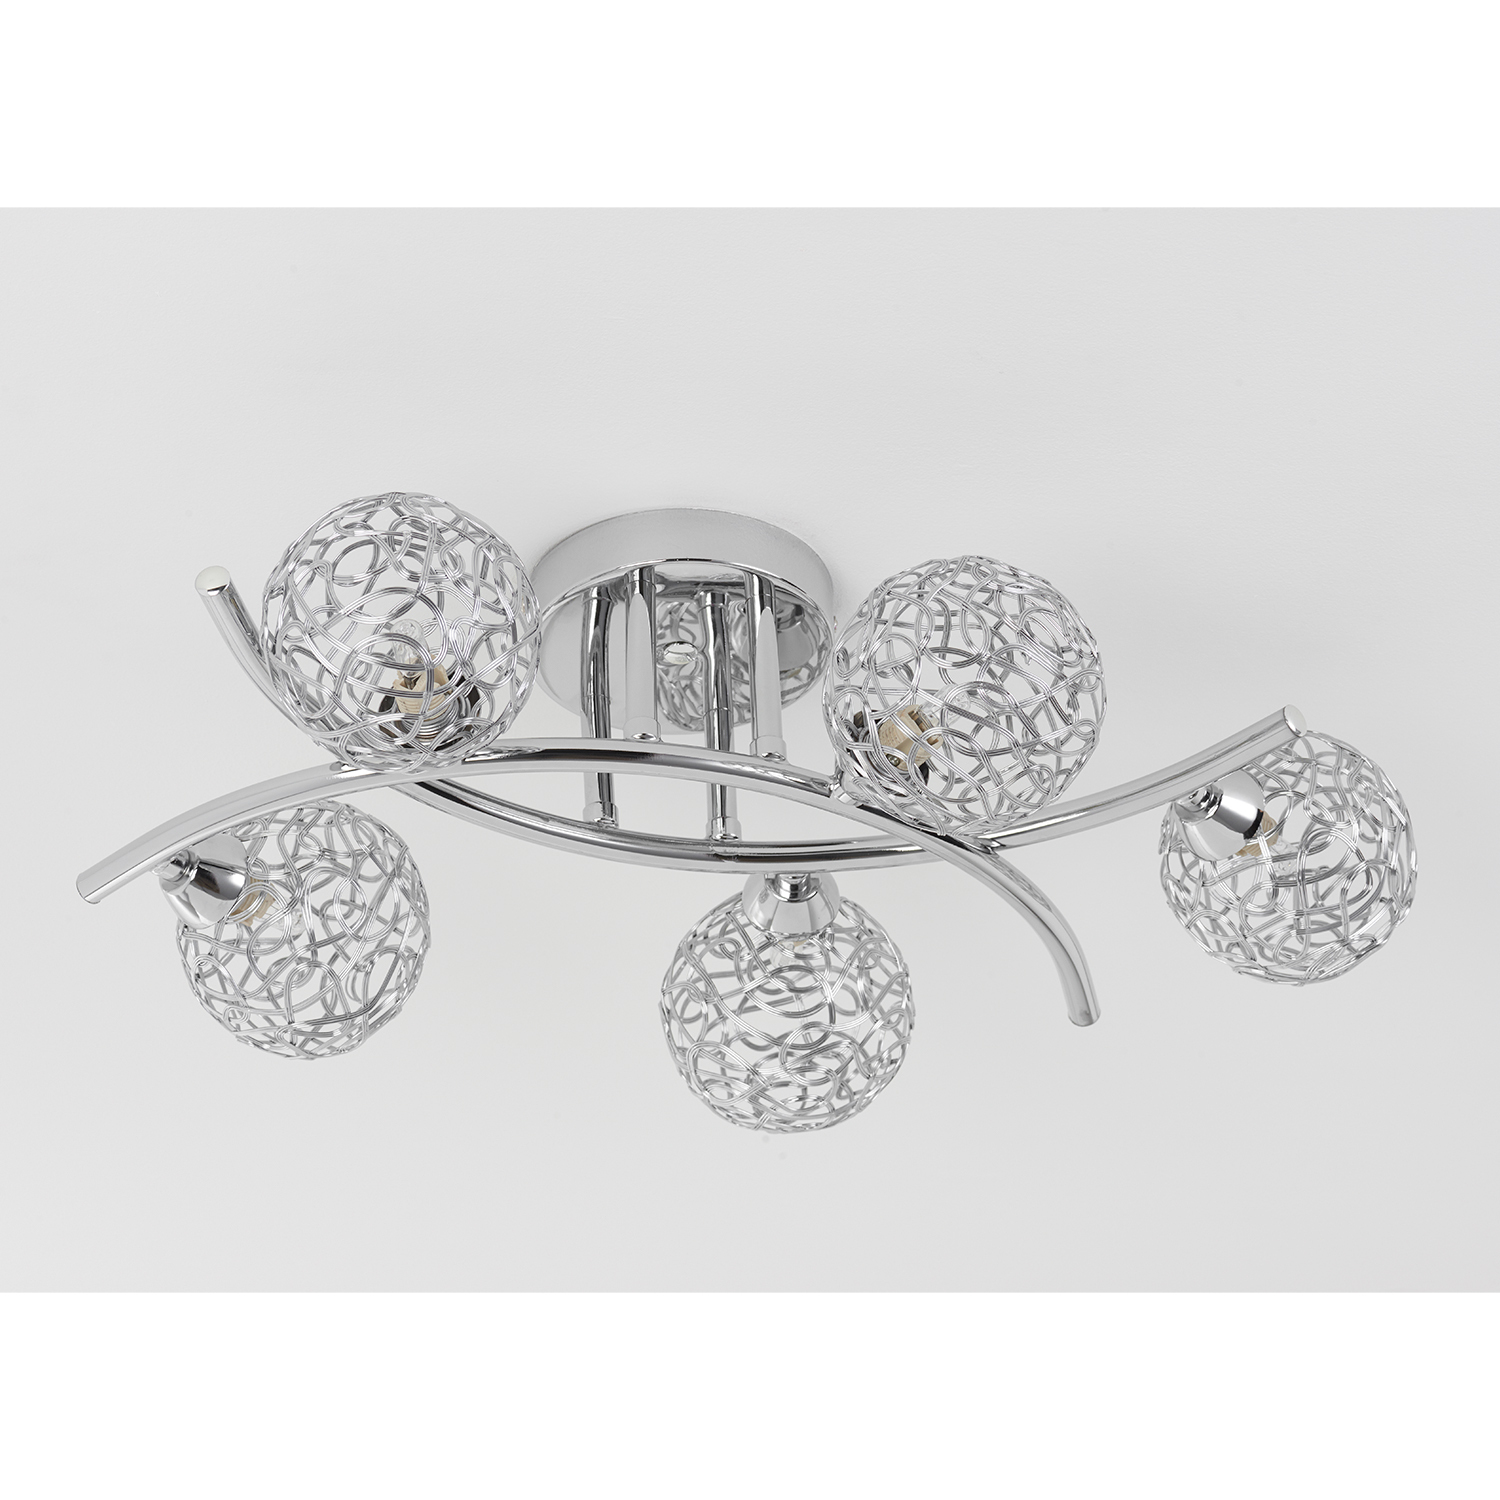 Silver 5 Sphere Electrical Fitting Ceiling Light Image 3